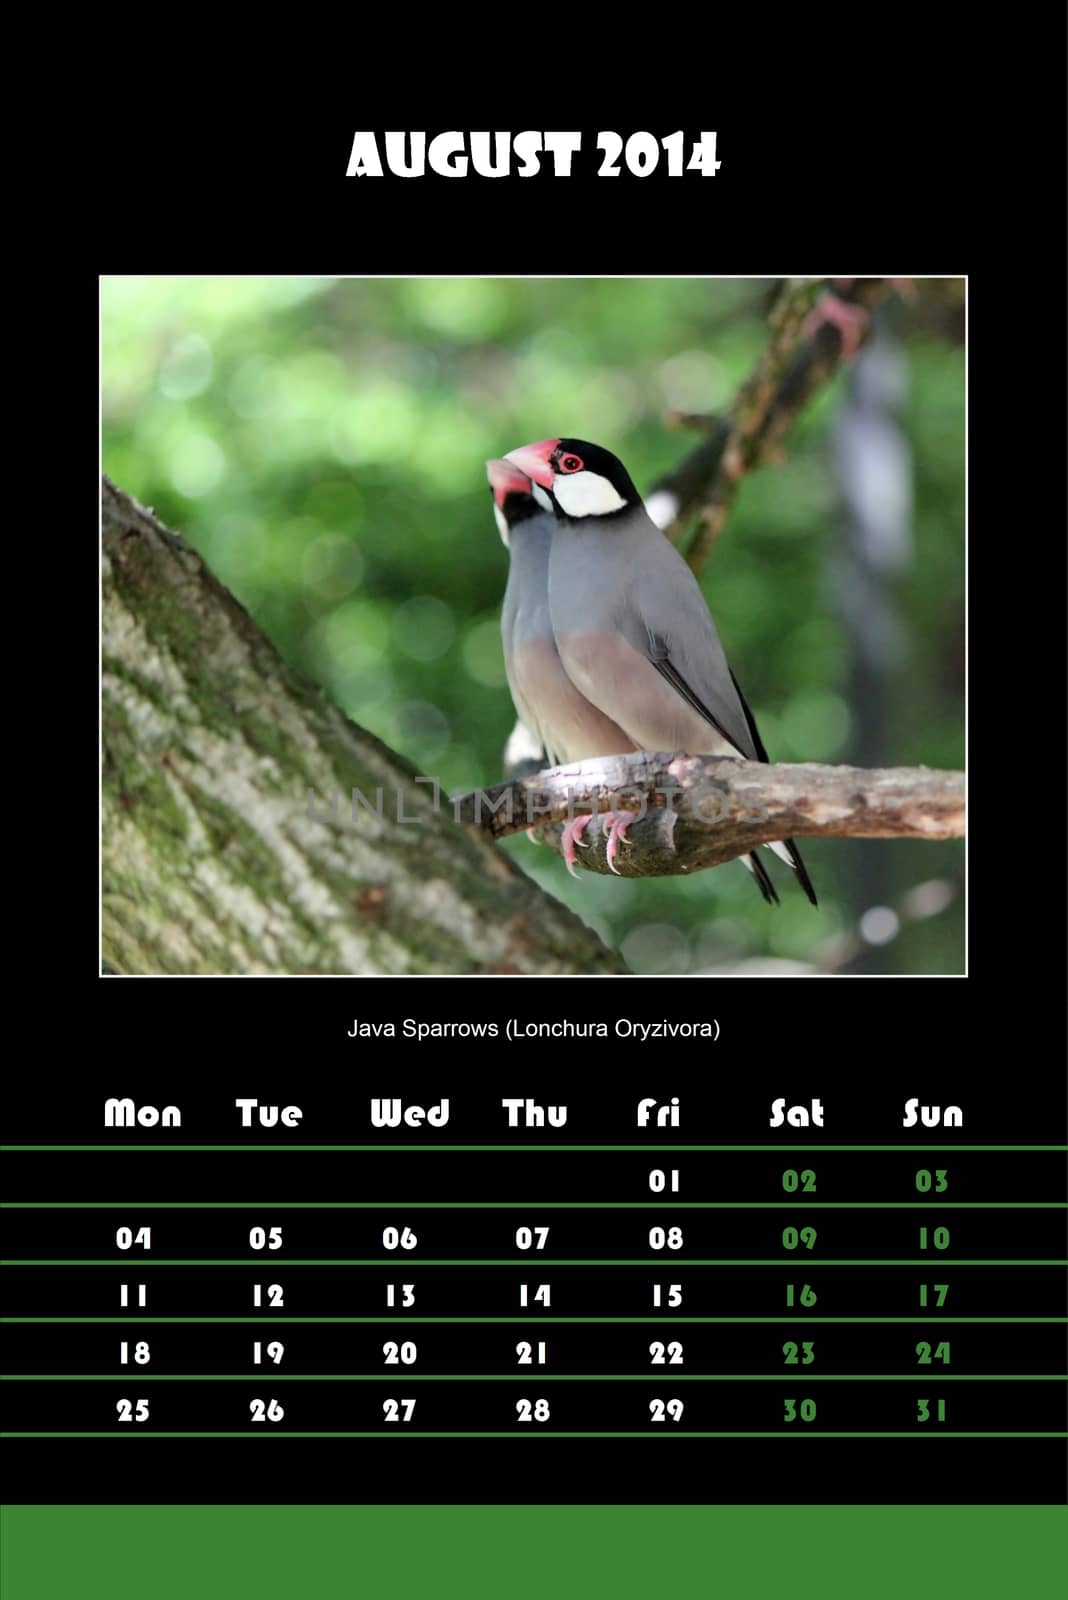 Colorful english calendar for august 2014 in black background, java sparrows (lonchura oryzivora) picture